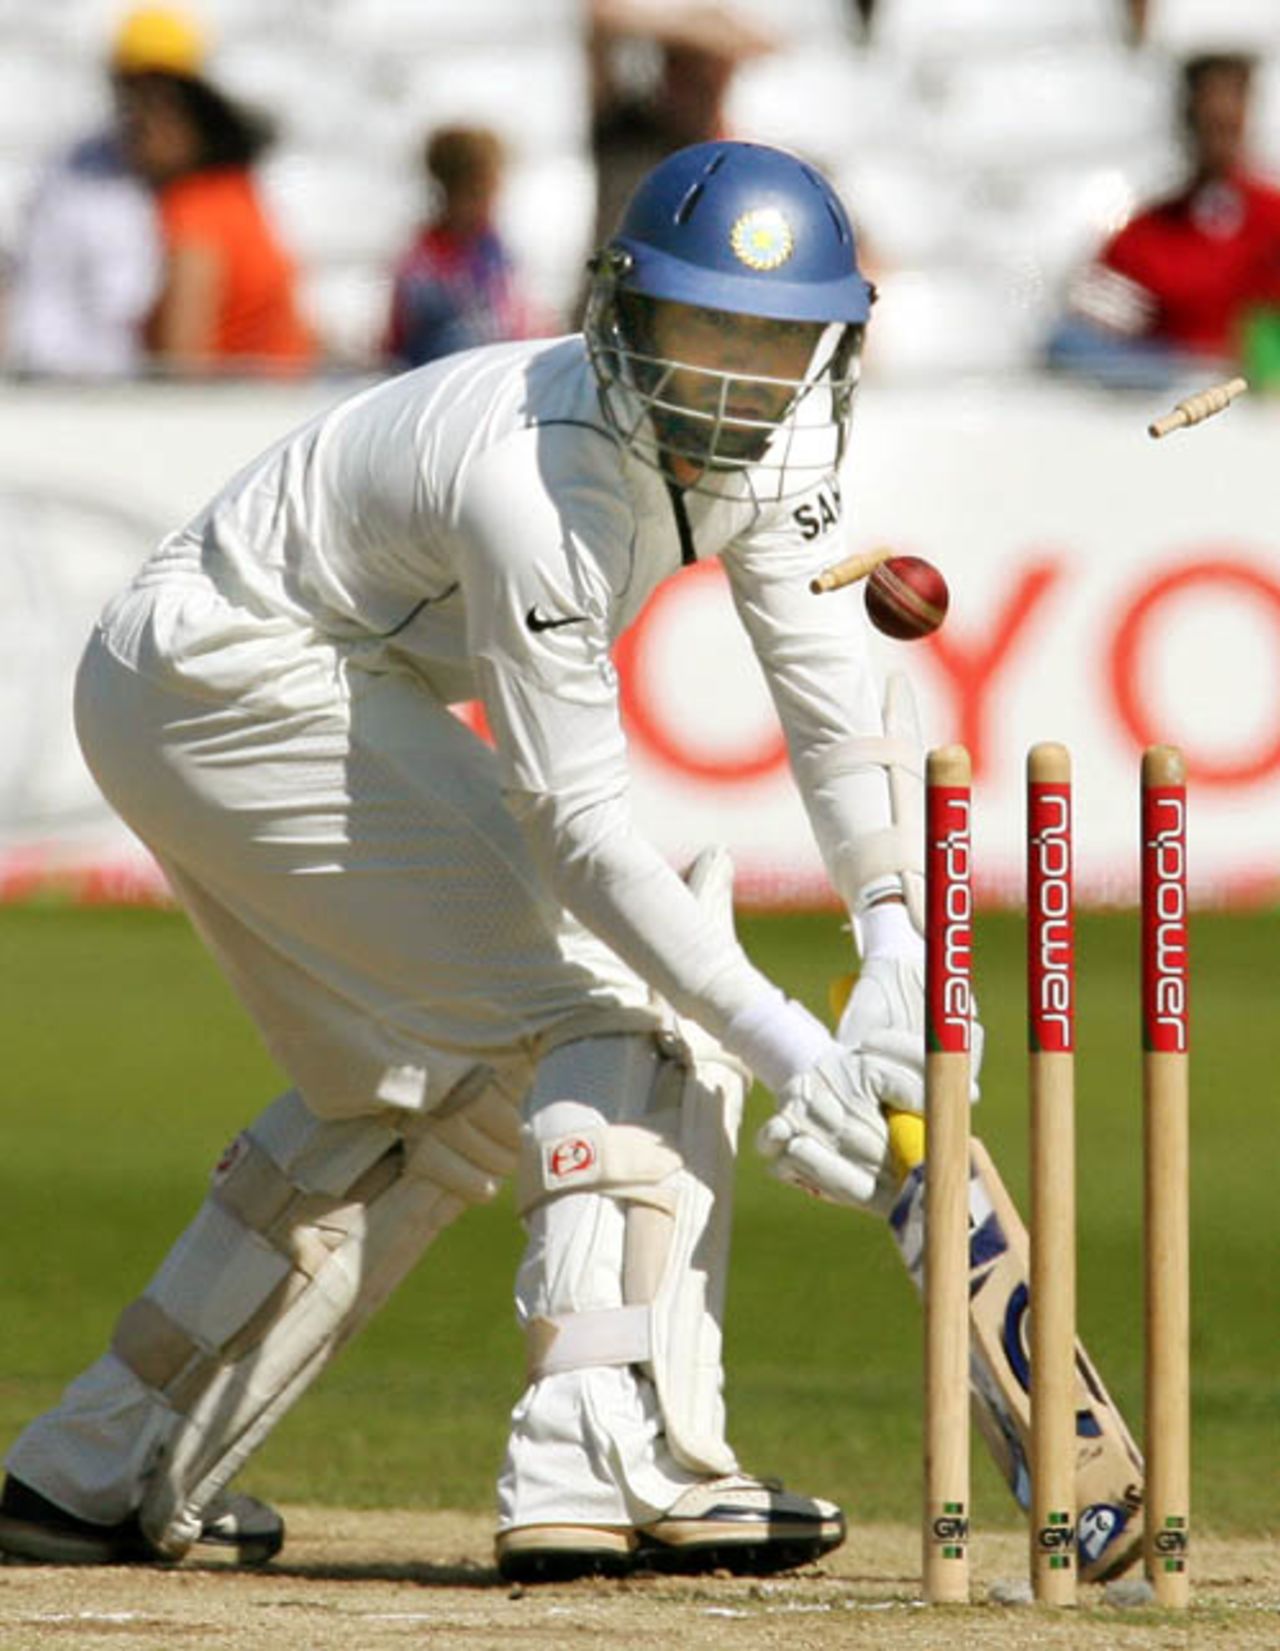 Dinesh Karthik survives a run-out attempt, England v India, 2nd Test, Trent Bridge, 5th day, July 31, 2007